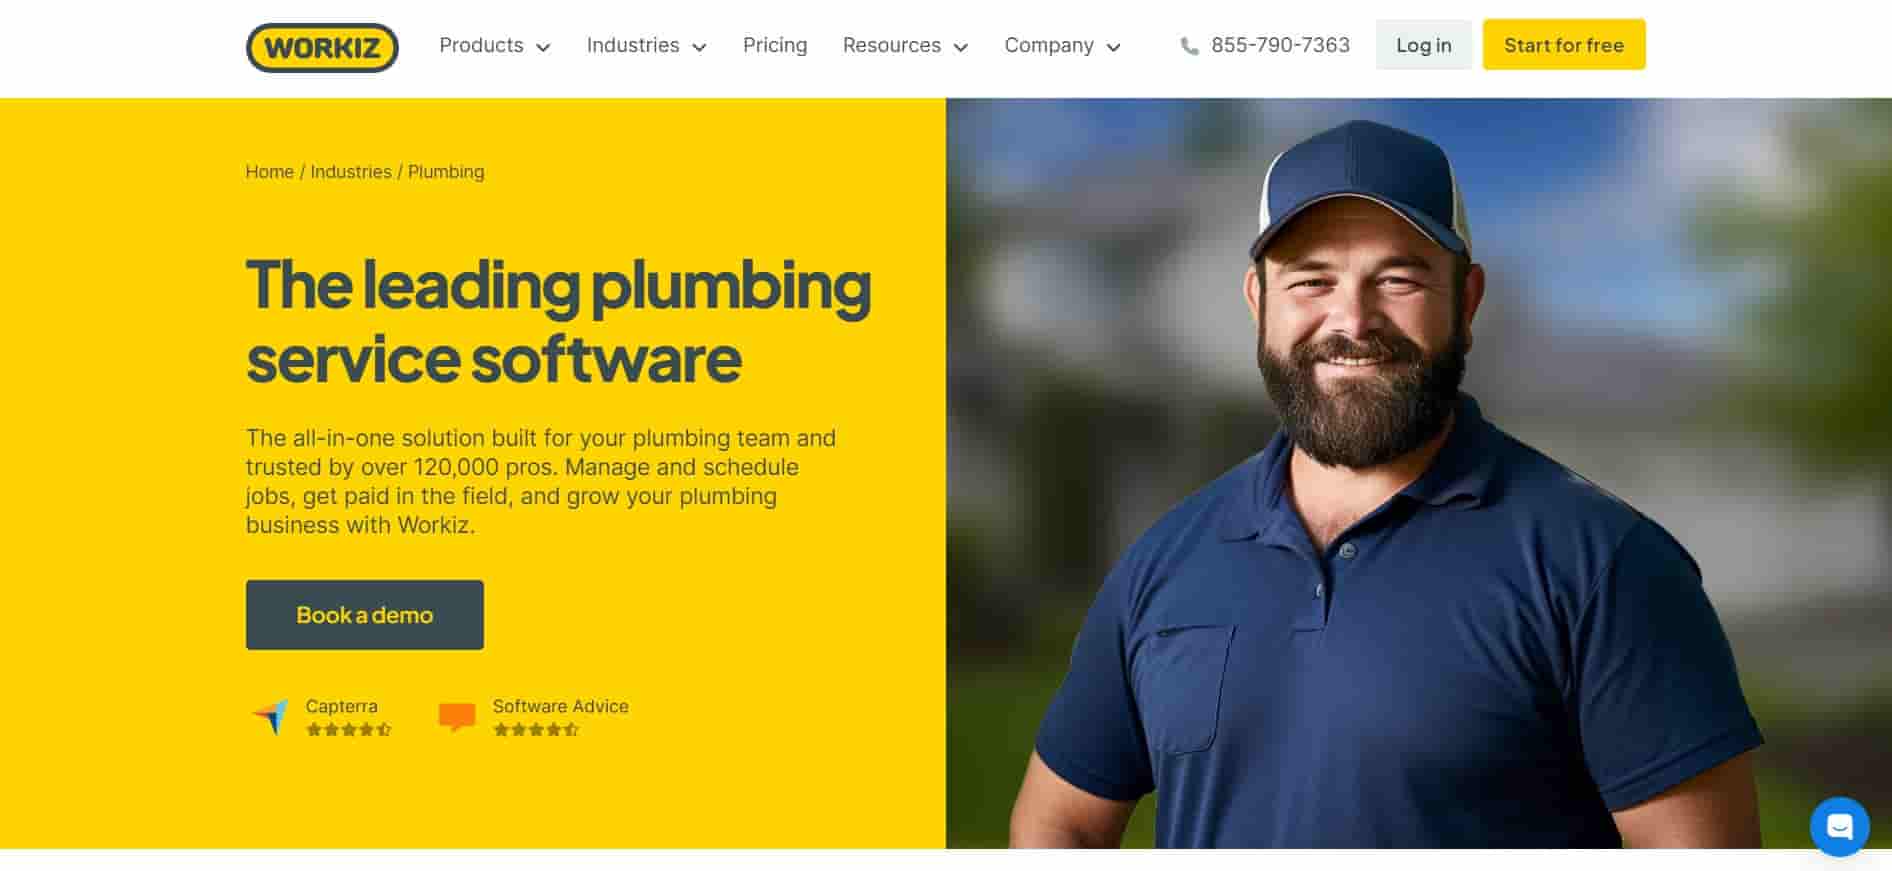 Image of Workiz's website homepage mentioning the leading plumbing service software